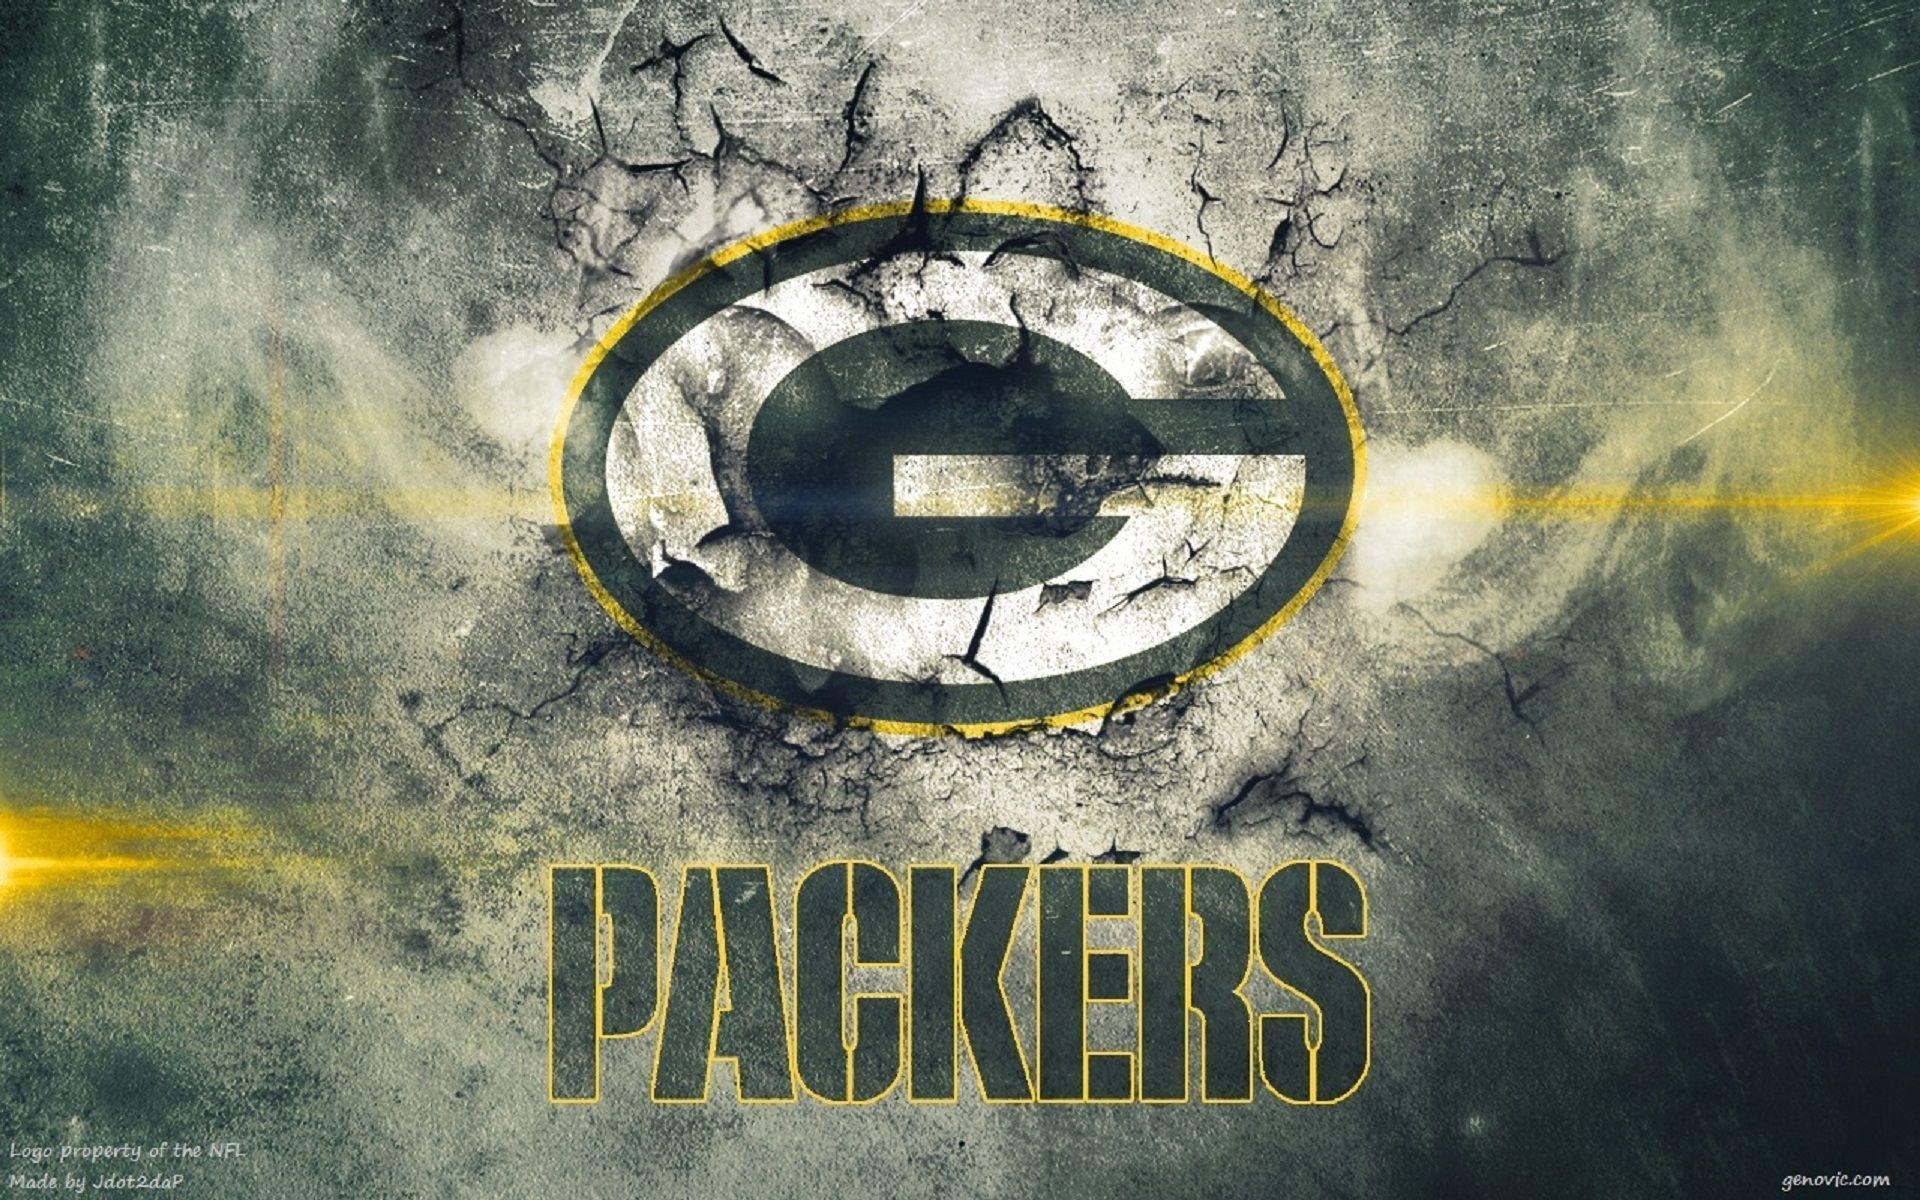 10 New Green Bay Packers Wallpaper 2016 FULL HD 1920×1080 For PC Background